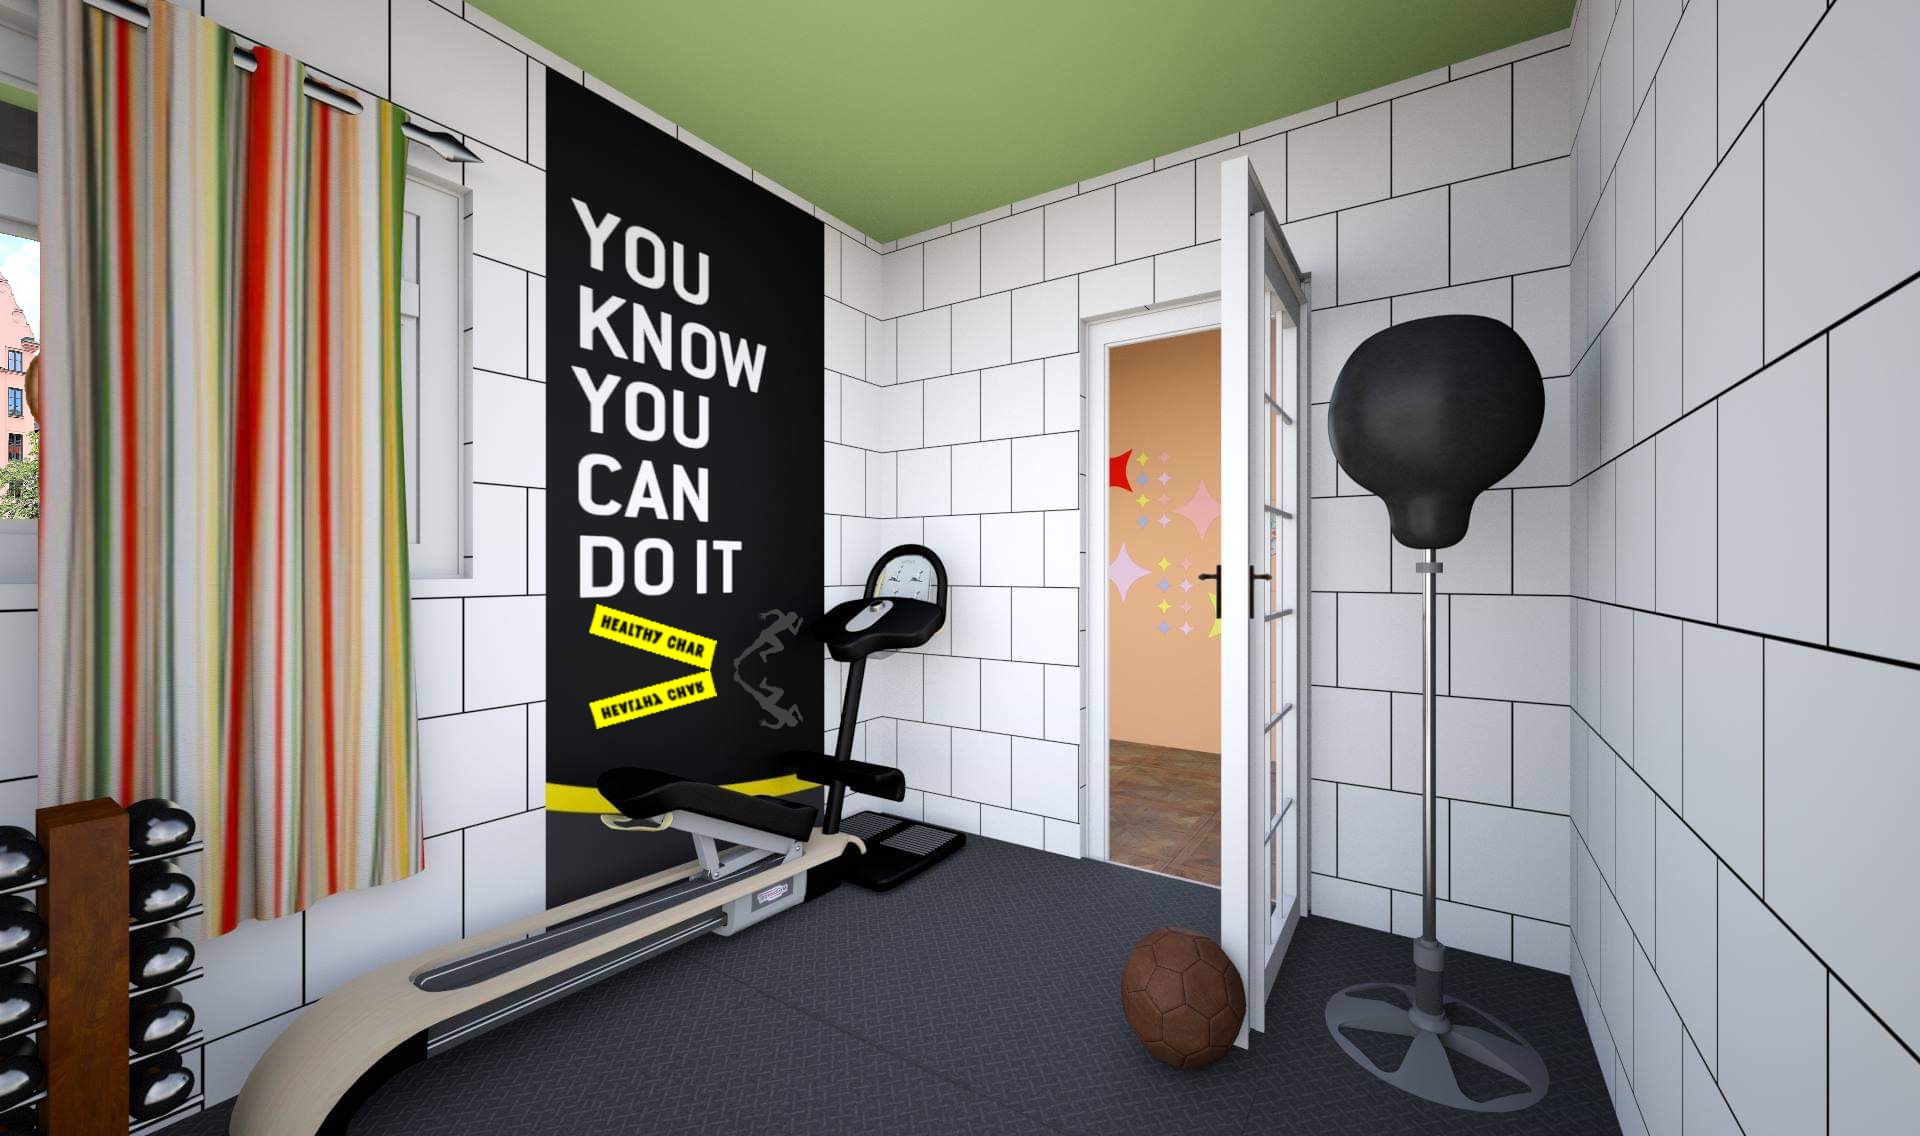 INT. SMALL HOME GYM OPEN DOOR – DAY